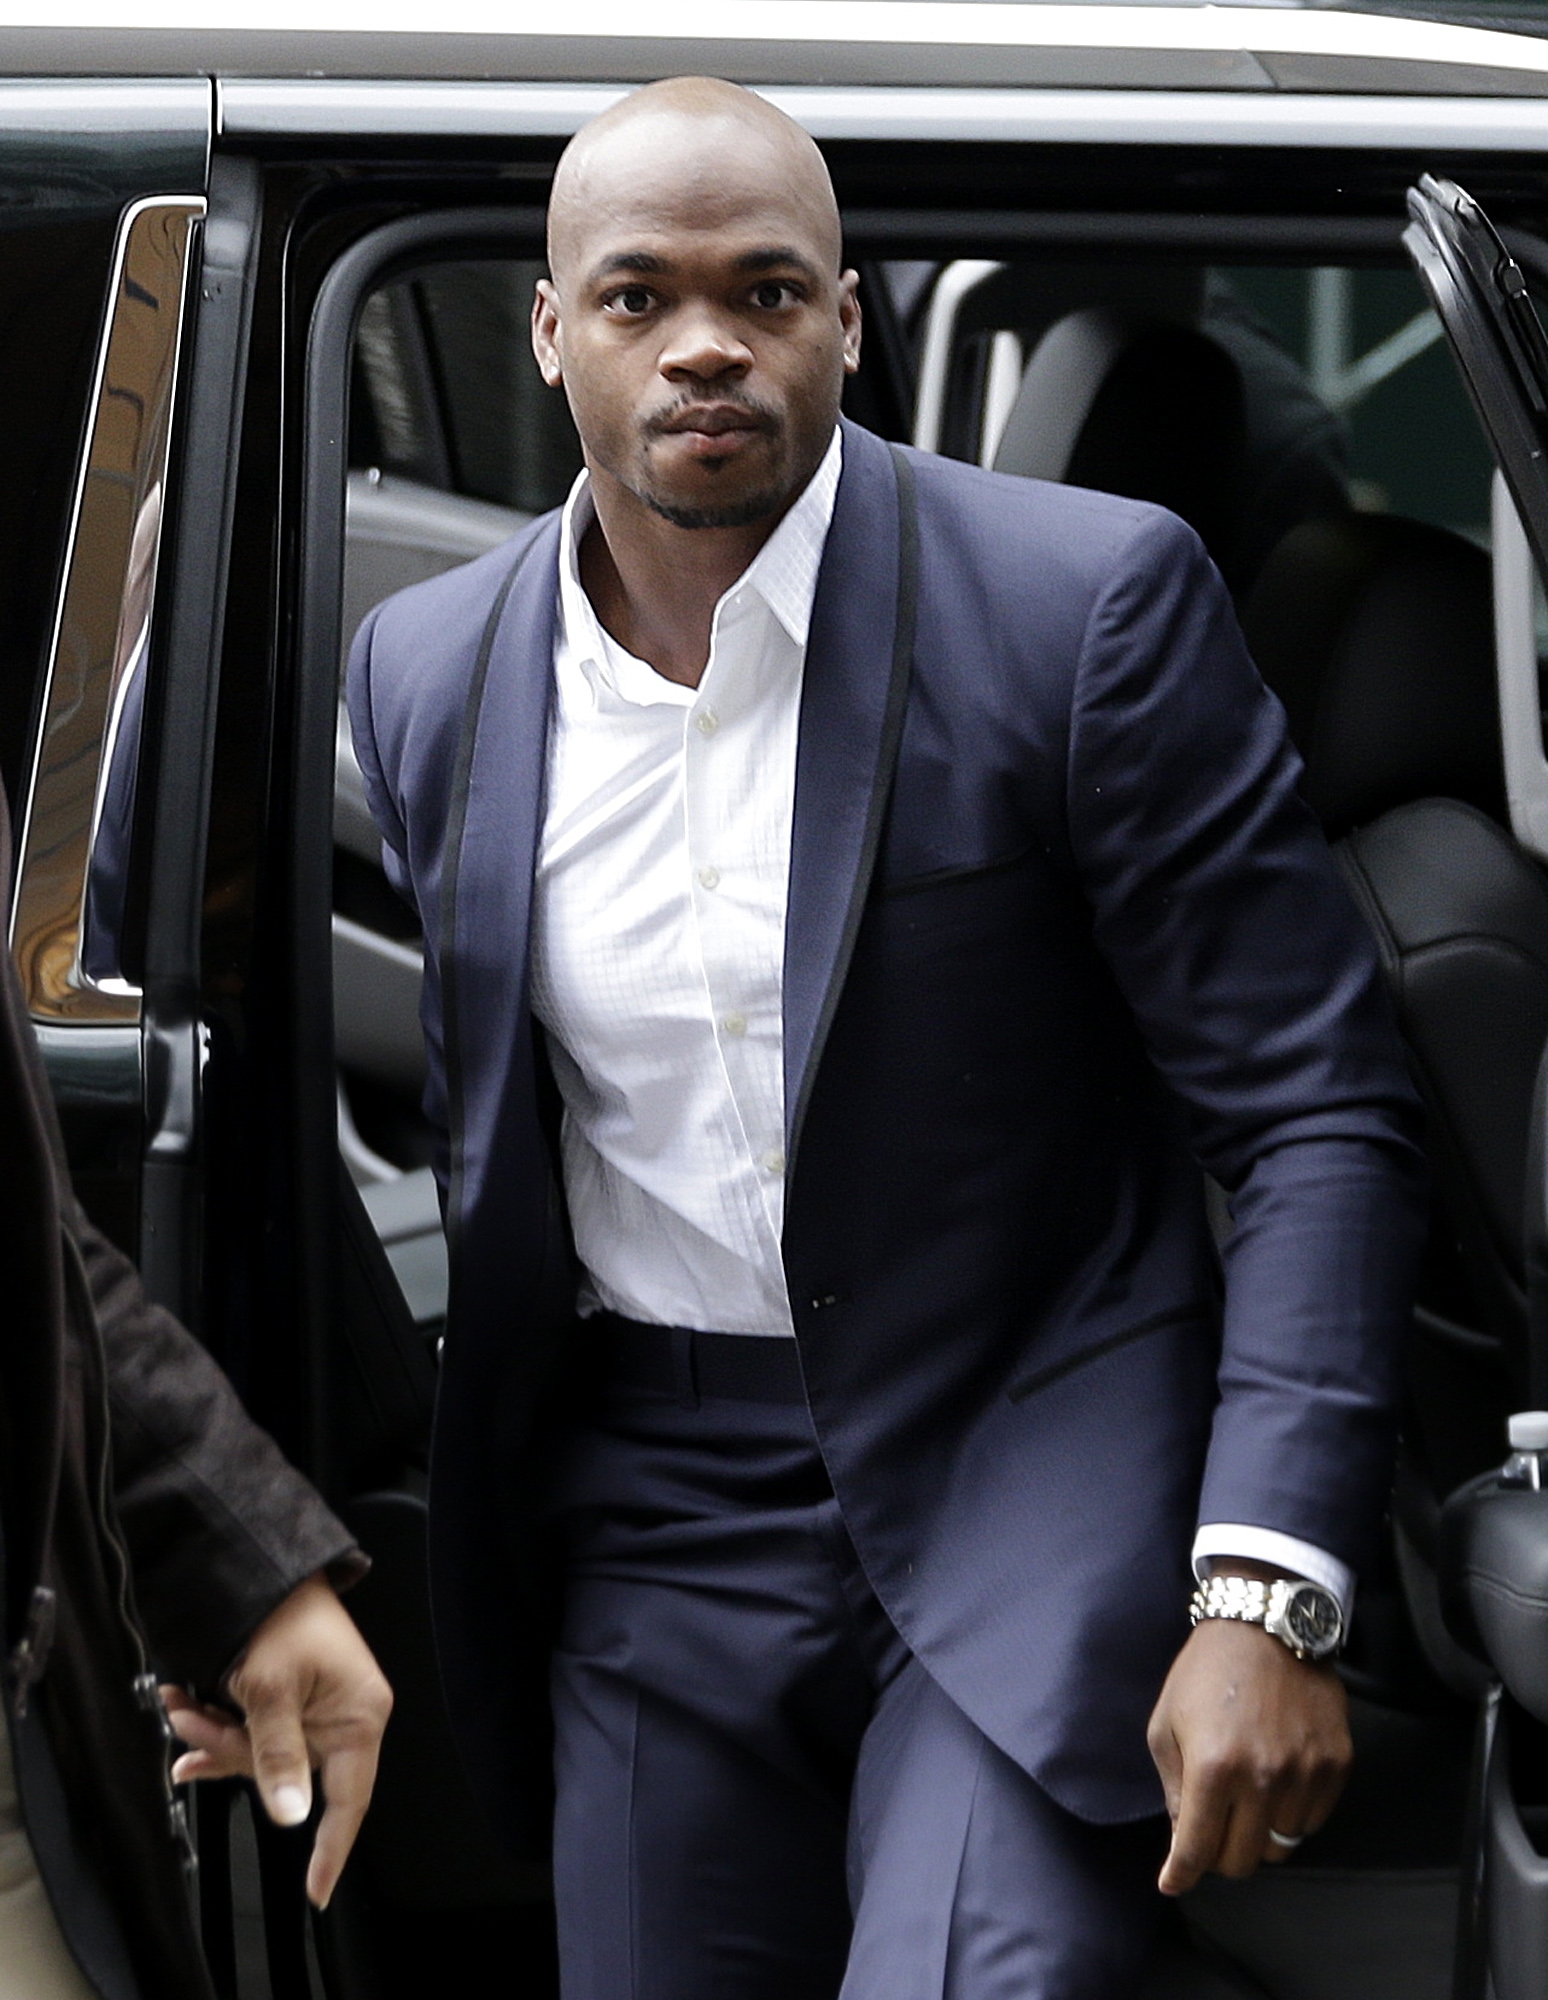 Minnesota Vikings' Adrian Peterson arrives for a hearing in New York City on Dec. 2, 2014.